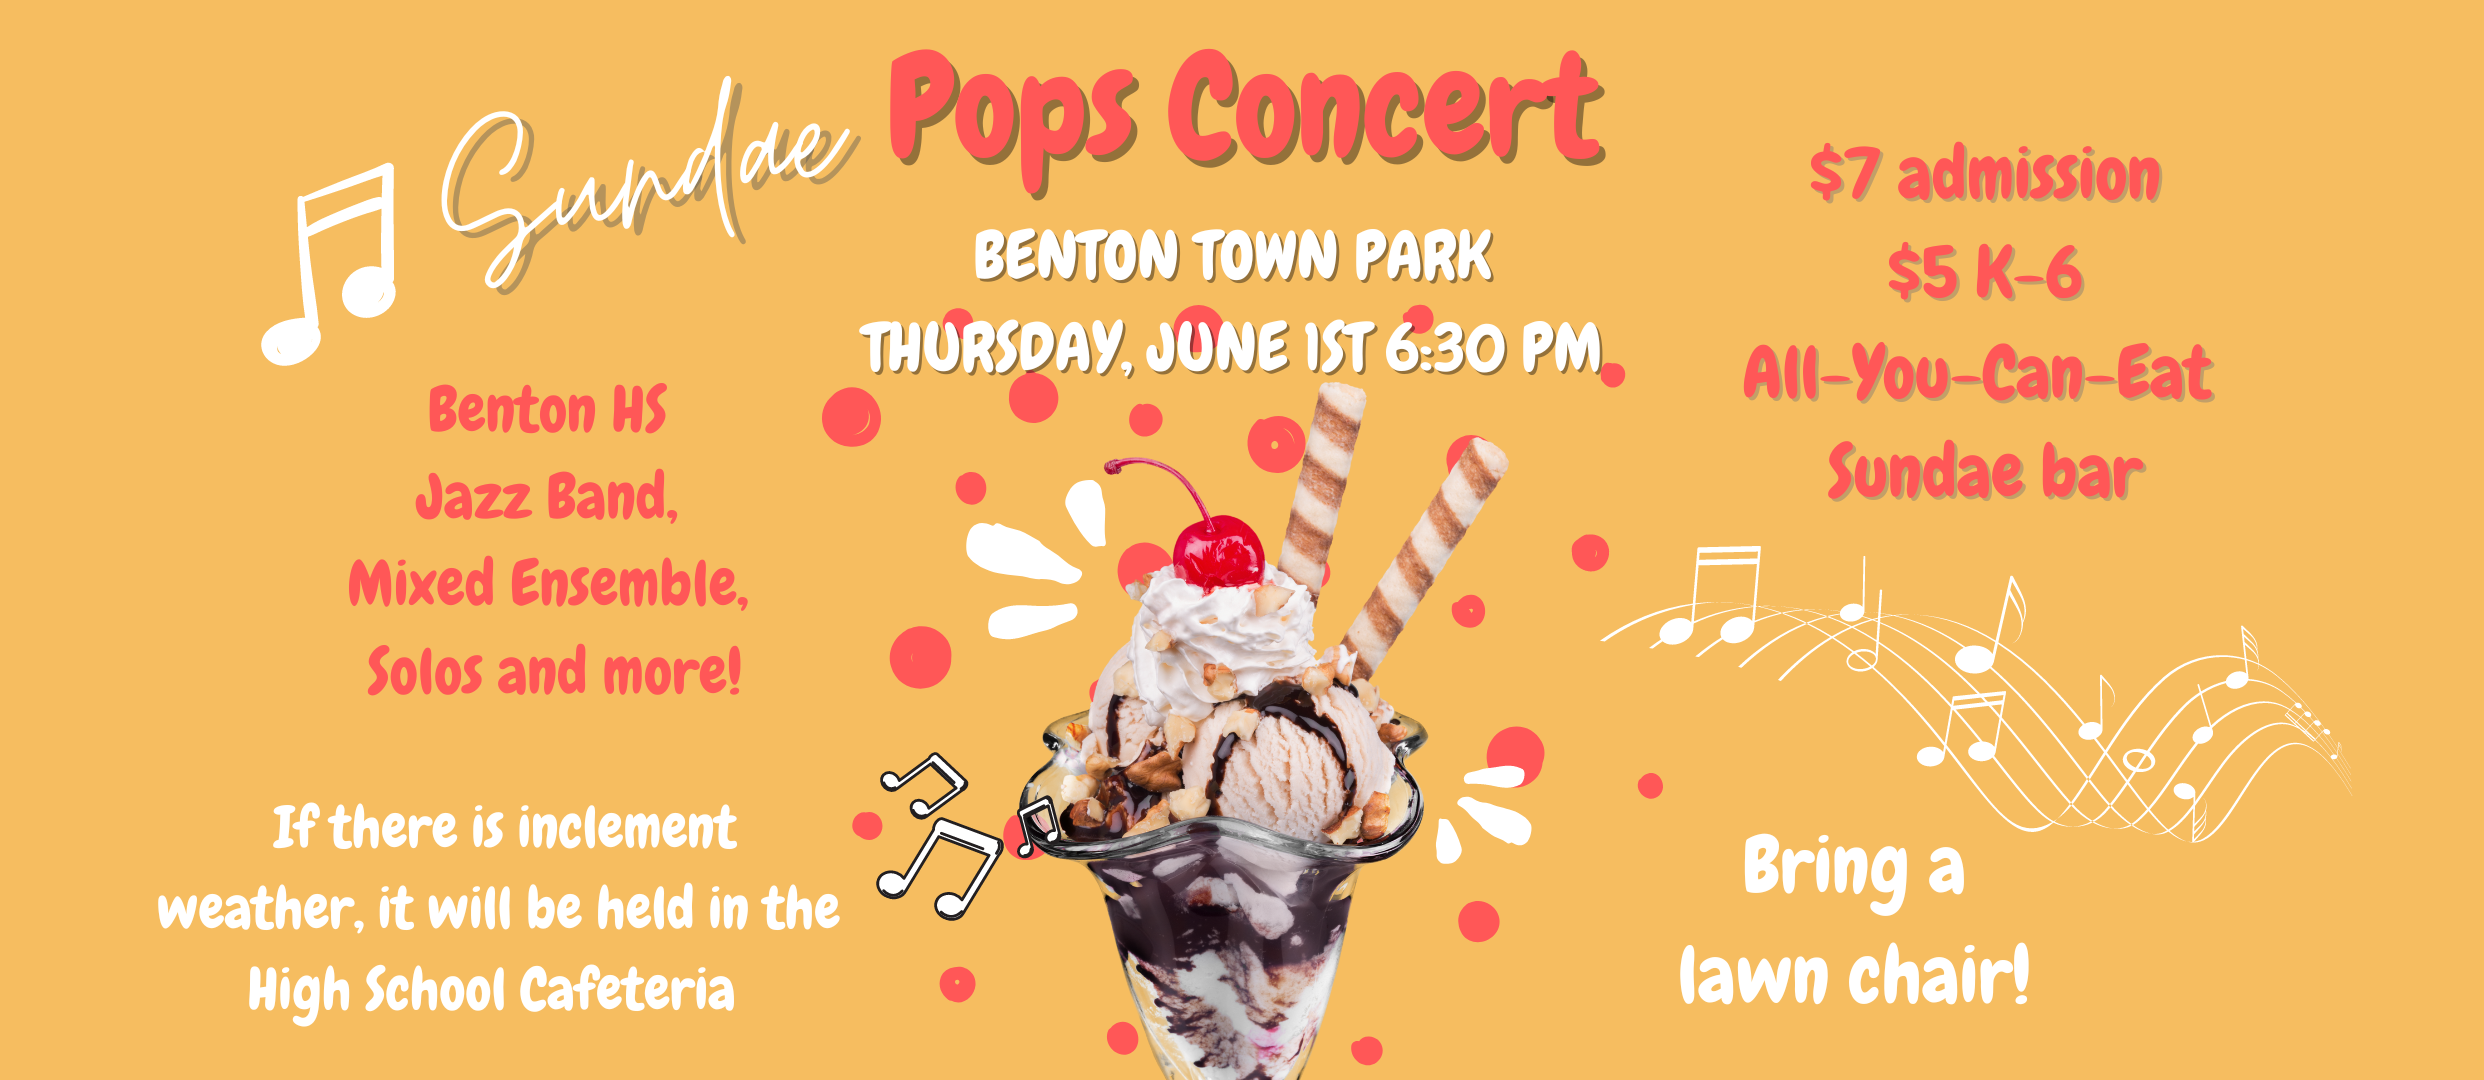 Sundae Pops Concert in the Benton Town Park on Thursday, June 1st at 6:30pm. $7 admission, $5 for k-6. Featuring the Benton HS Jazz Band, Mixed Ensemble, Solos and more! If there is inclement weather, it will be held in the HS Cafeteria. Don't forget to bring a lawn chair!